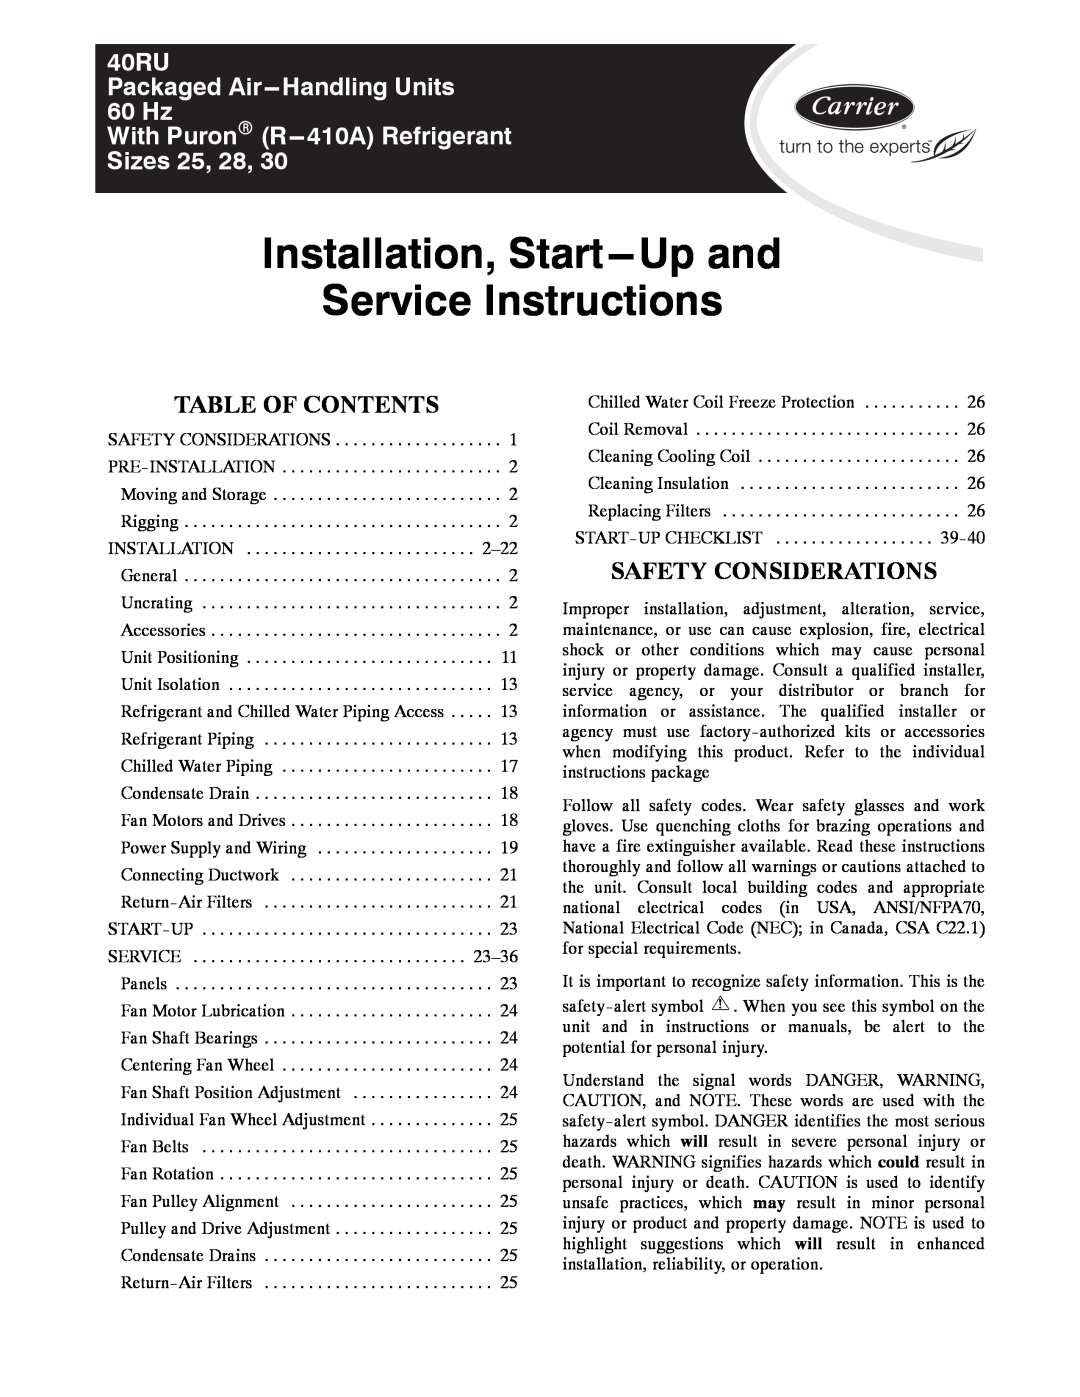 Carrier 40RU manual Table Of Contents, Safety Considerations, Installation, Start---Upand Service Instructions 